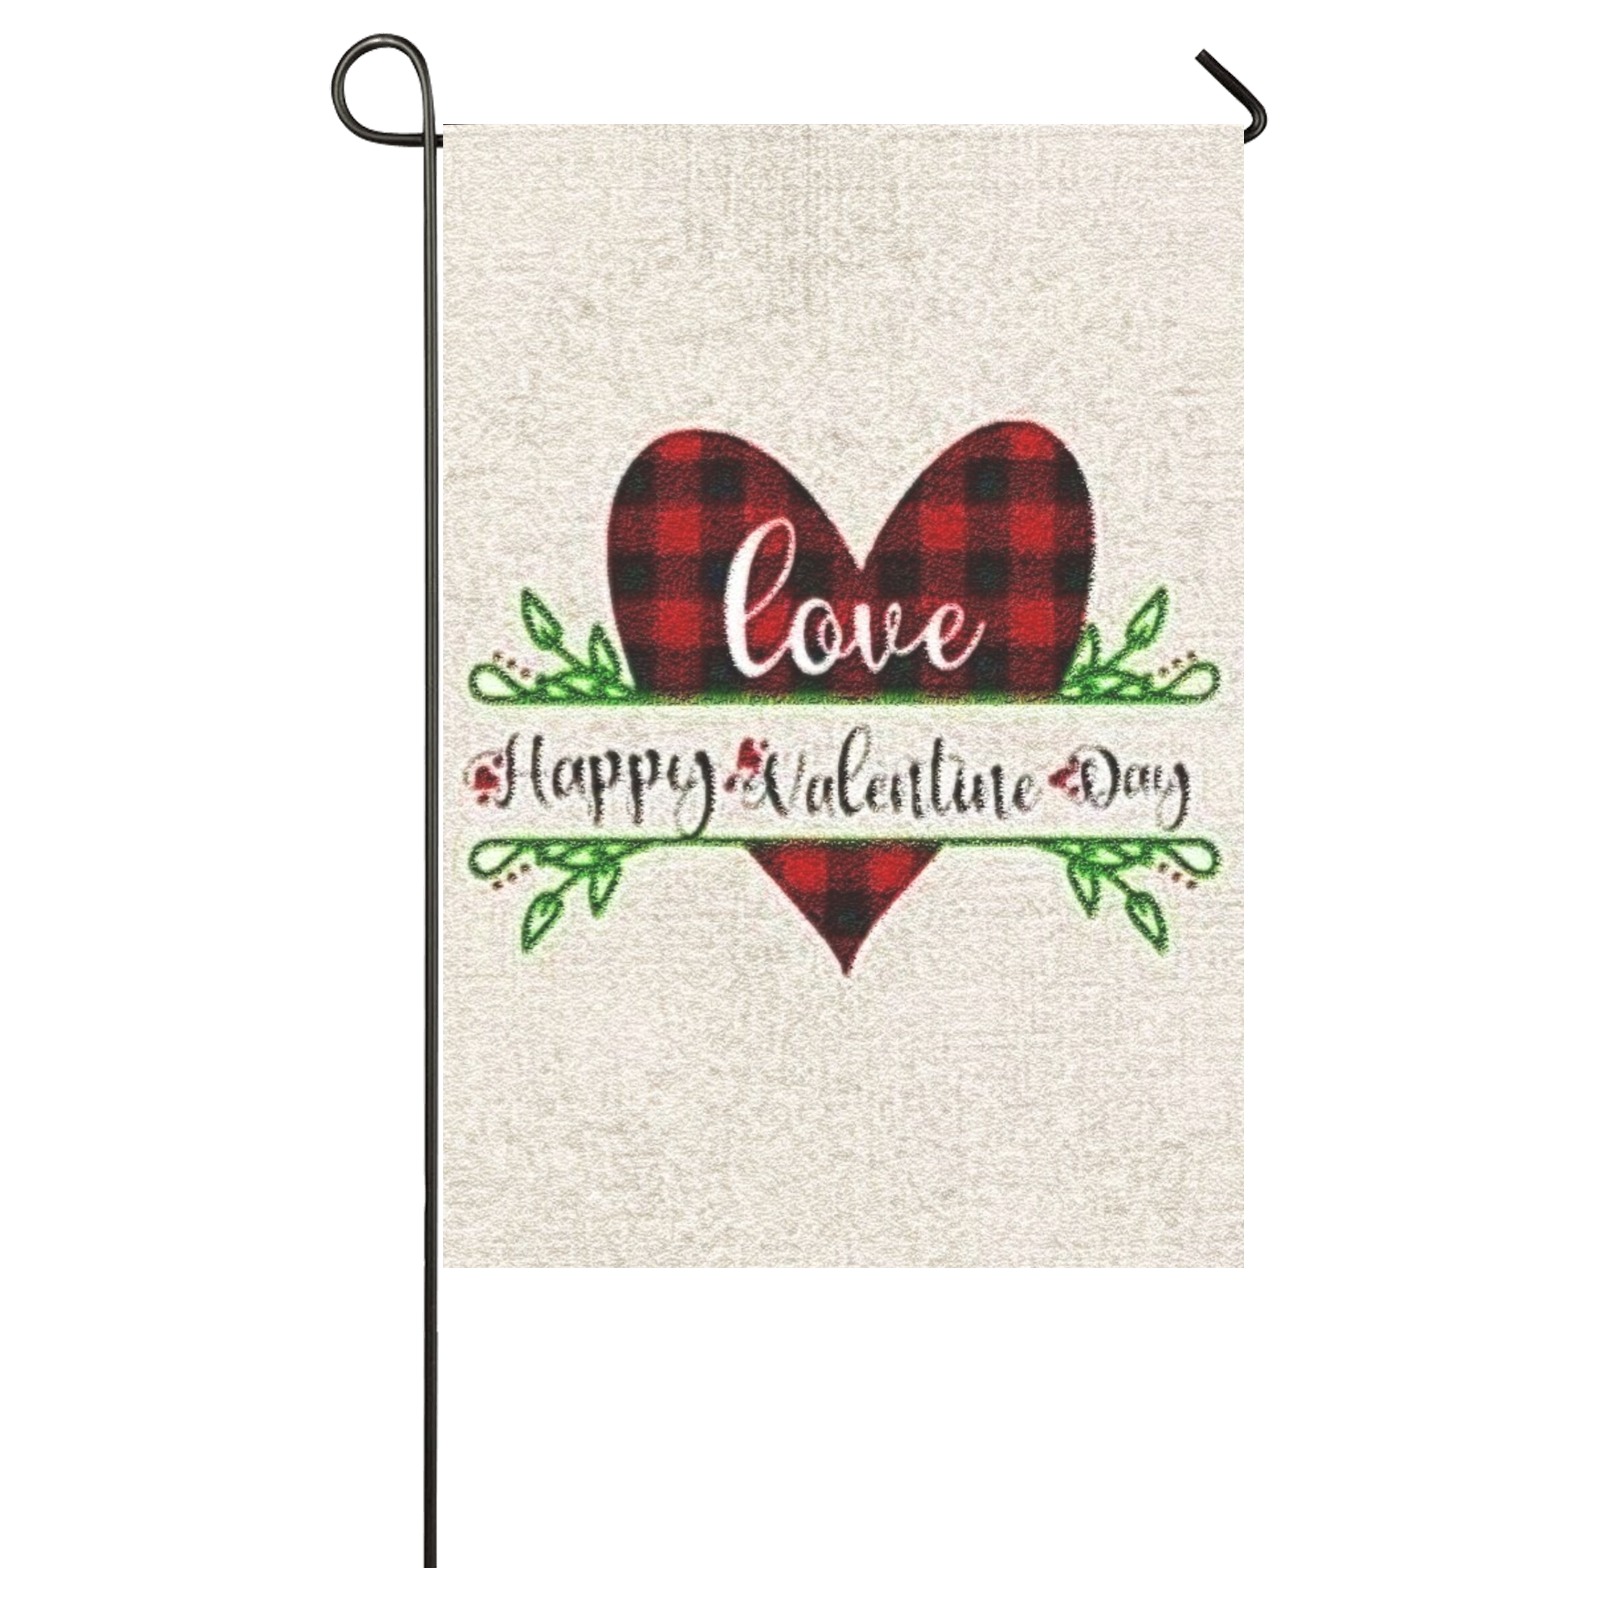 V-day heart and saying Garden Flag 28''x40'' (Two Sides Printing)